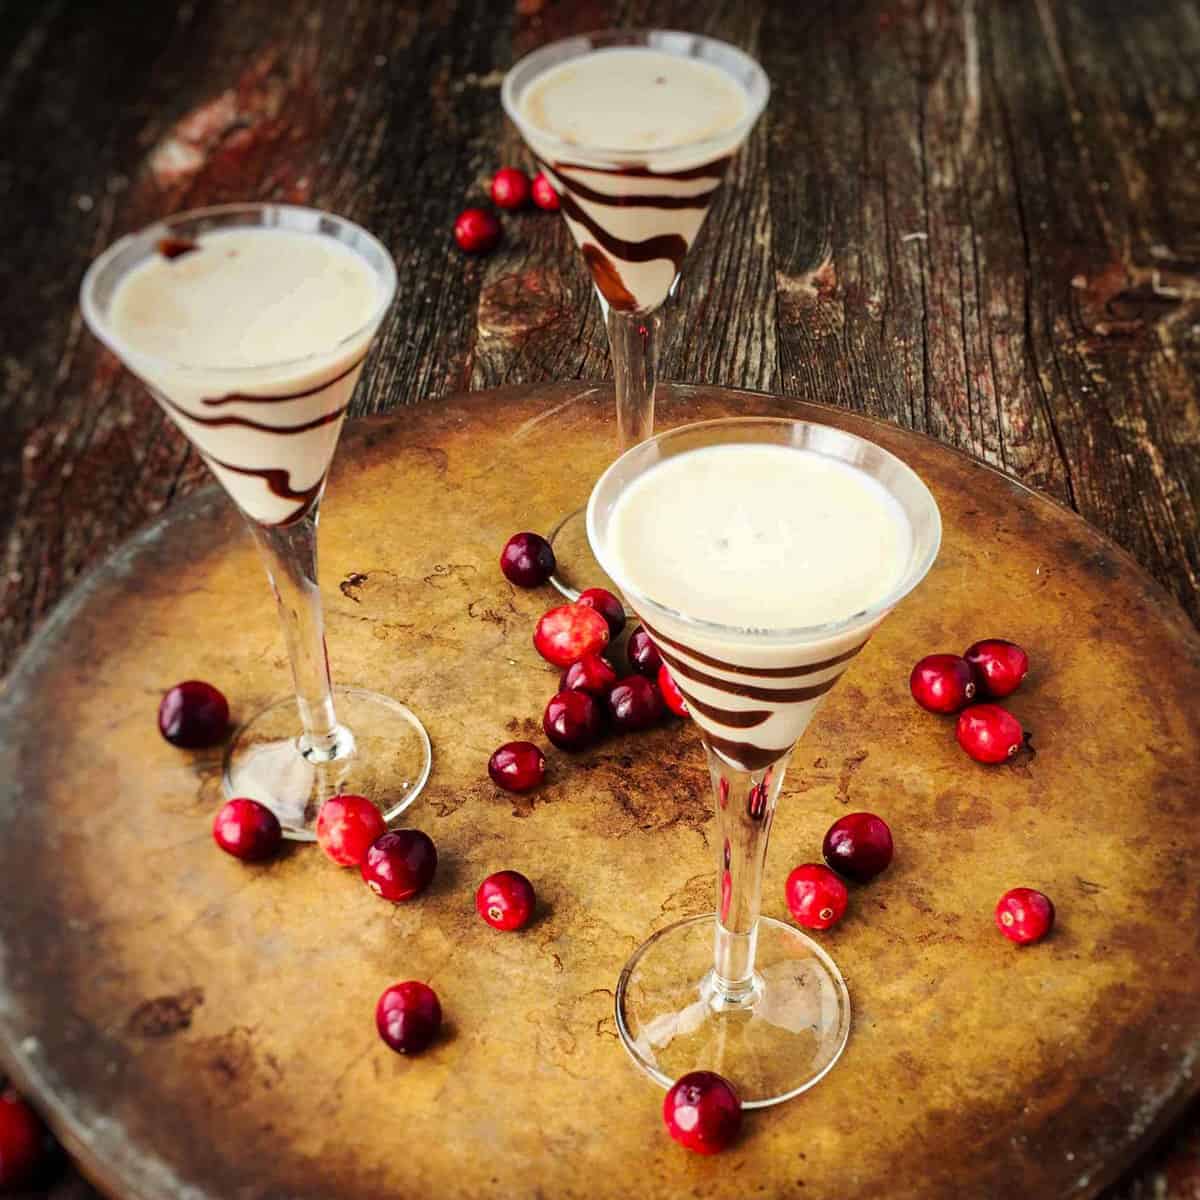 3 stemmed glasses with baileys Irish cream with chocolate swirled on the glass and cranberry on the wooden table below.